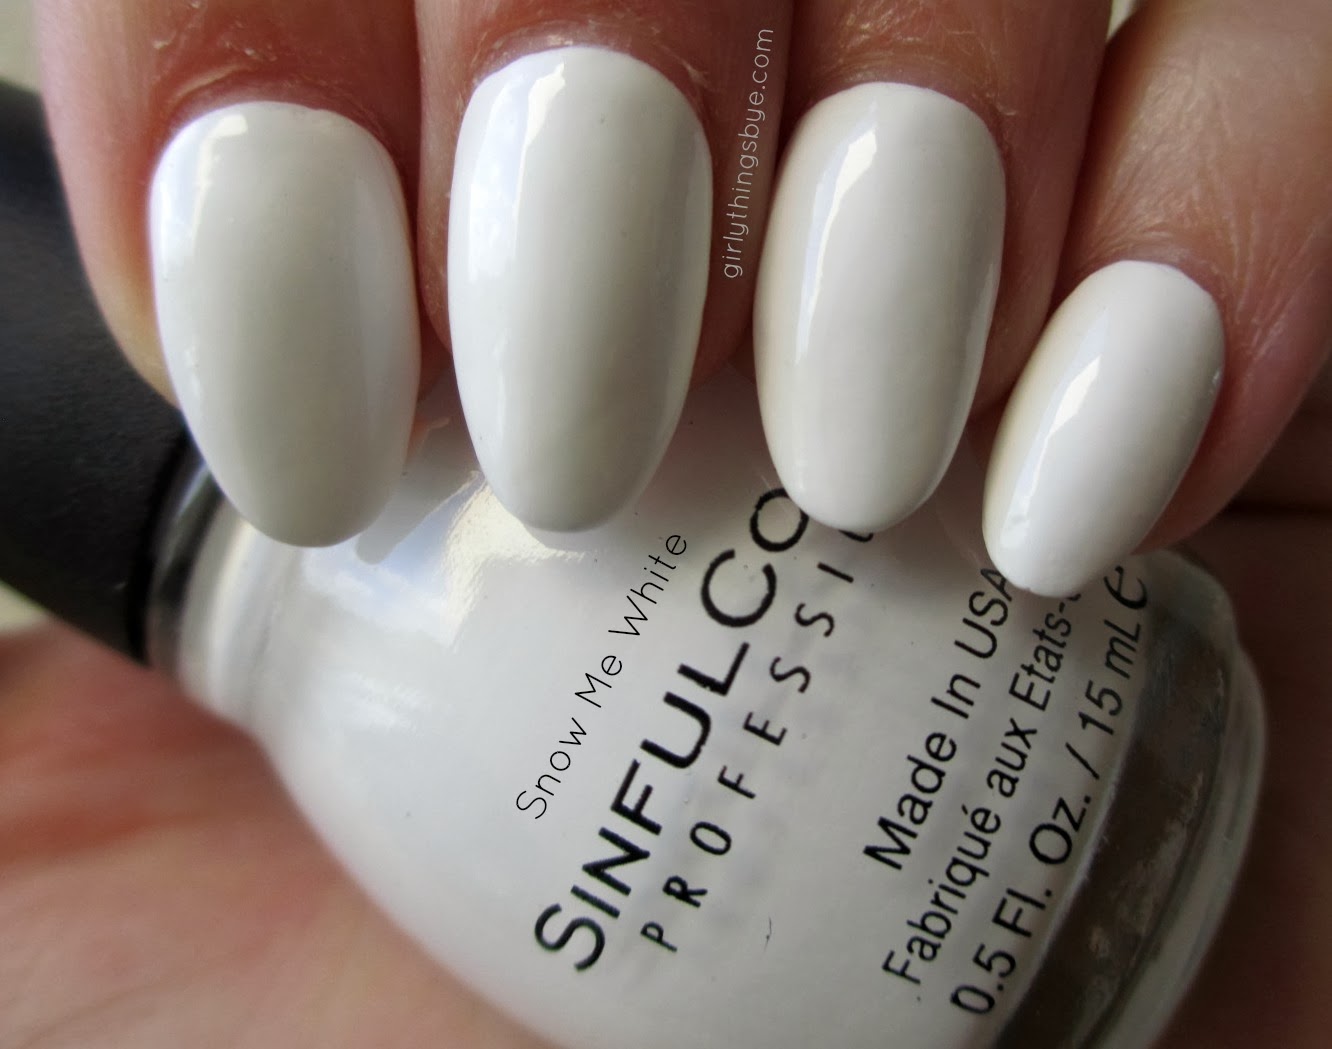 Sinful Colors® Nail Polish - Prosecco, 0.5 fl oz - Jay C Food Stores